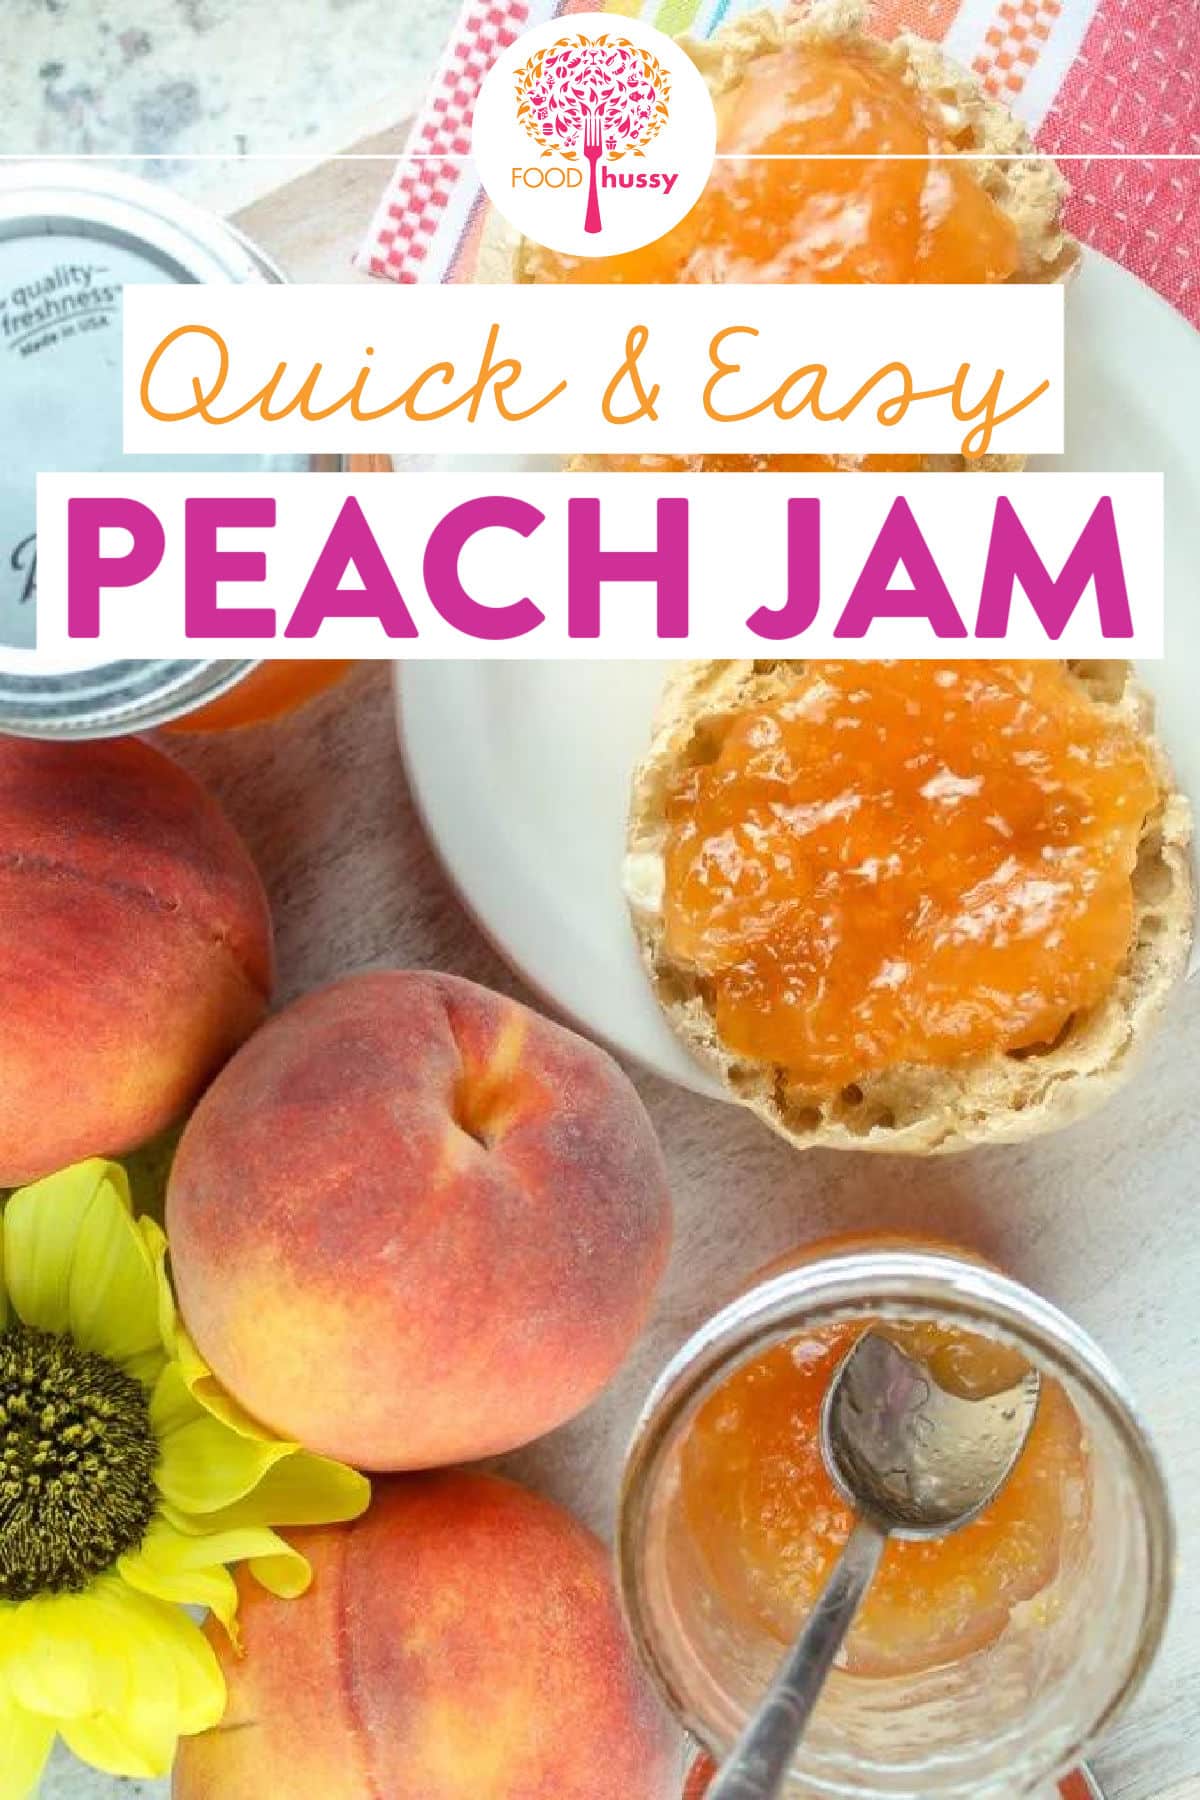 Summer means fresh peaches and that means I'm making this easy peach jam - from scratch! I'll tell you - it's so good - I've eaten two jars of it already. Summer fruit season is definitely my favorite! via @foodhussy